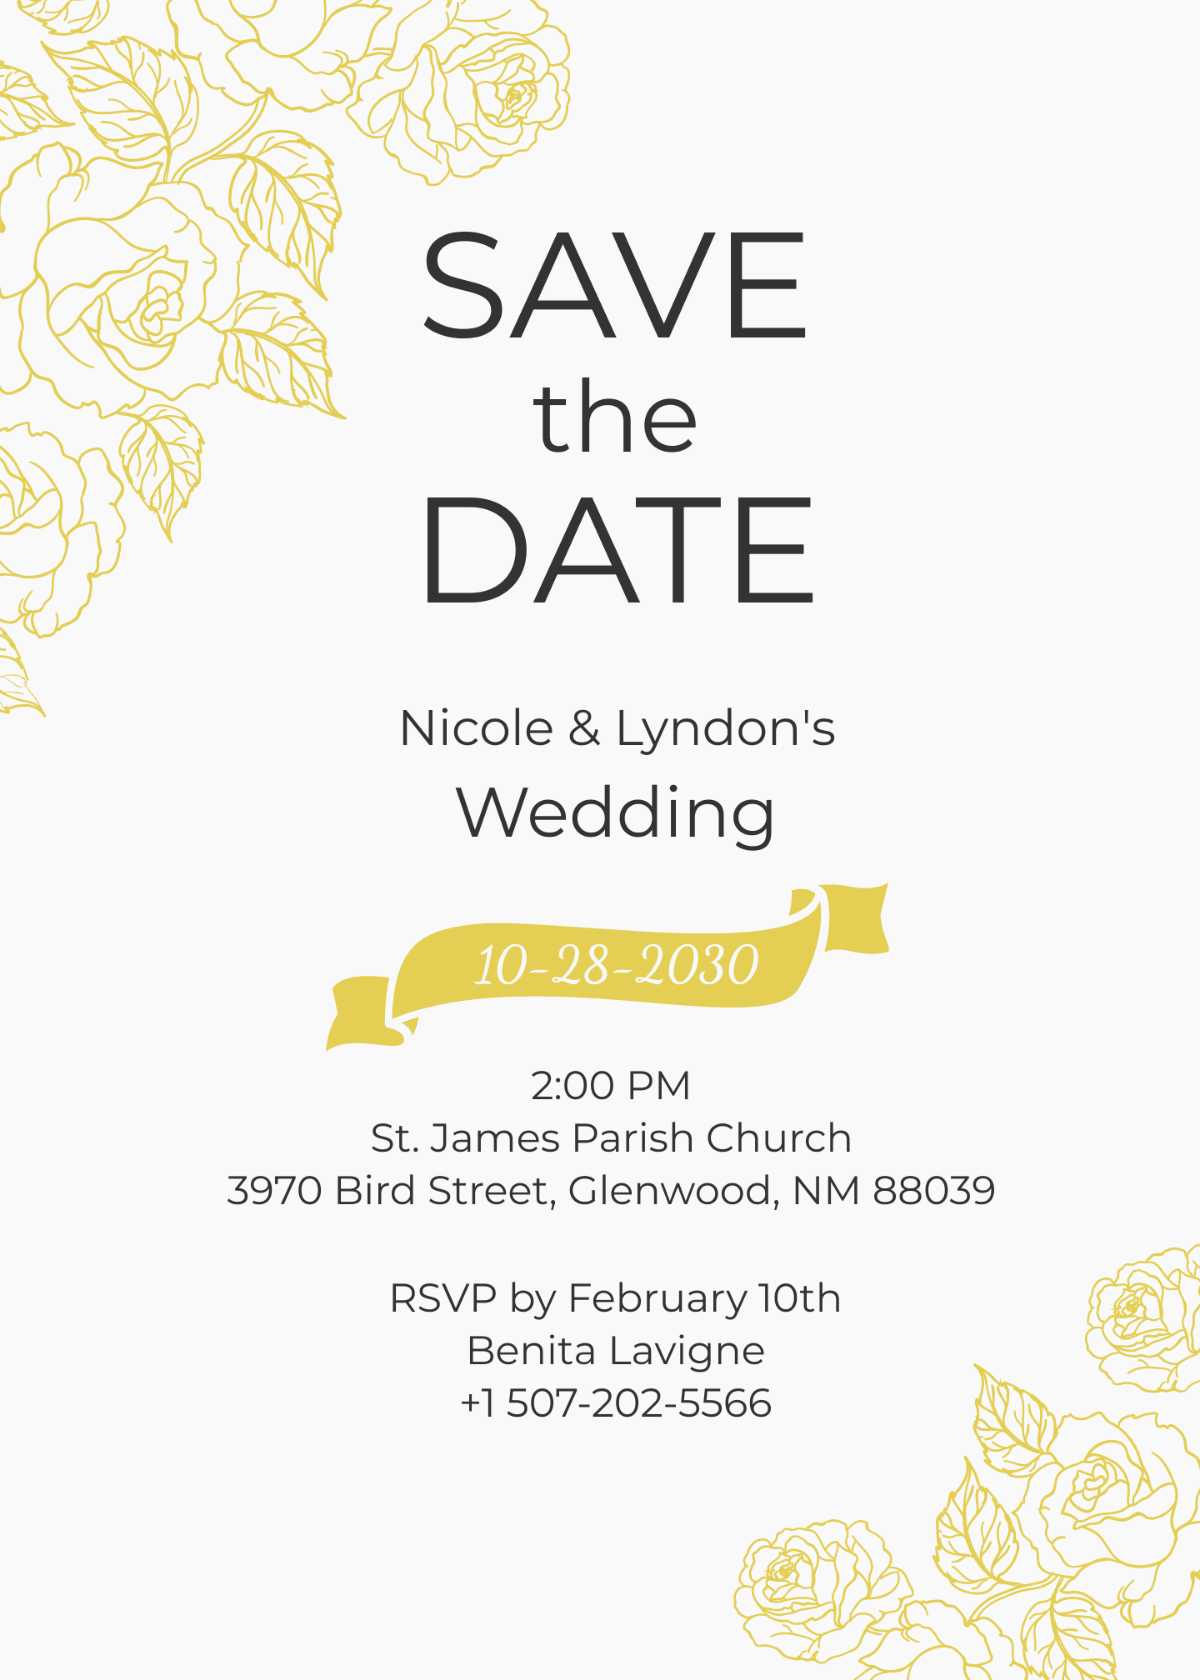 Save the Date Wedding Invitation Template